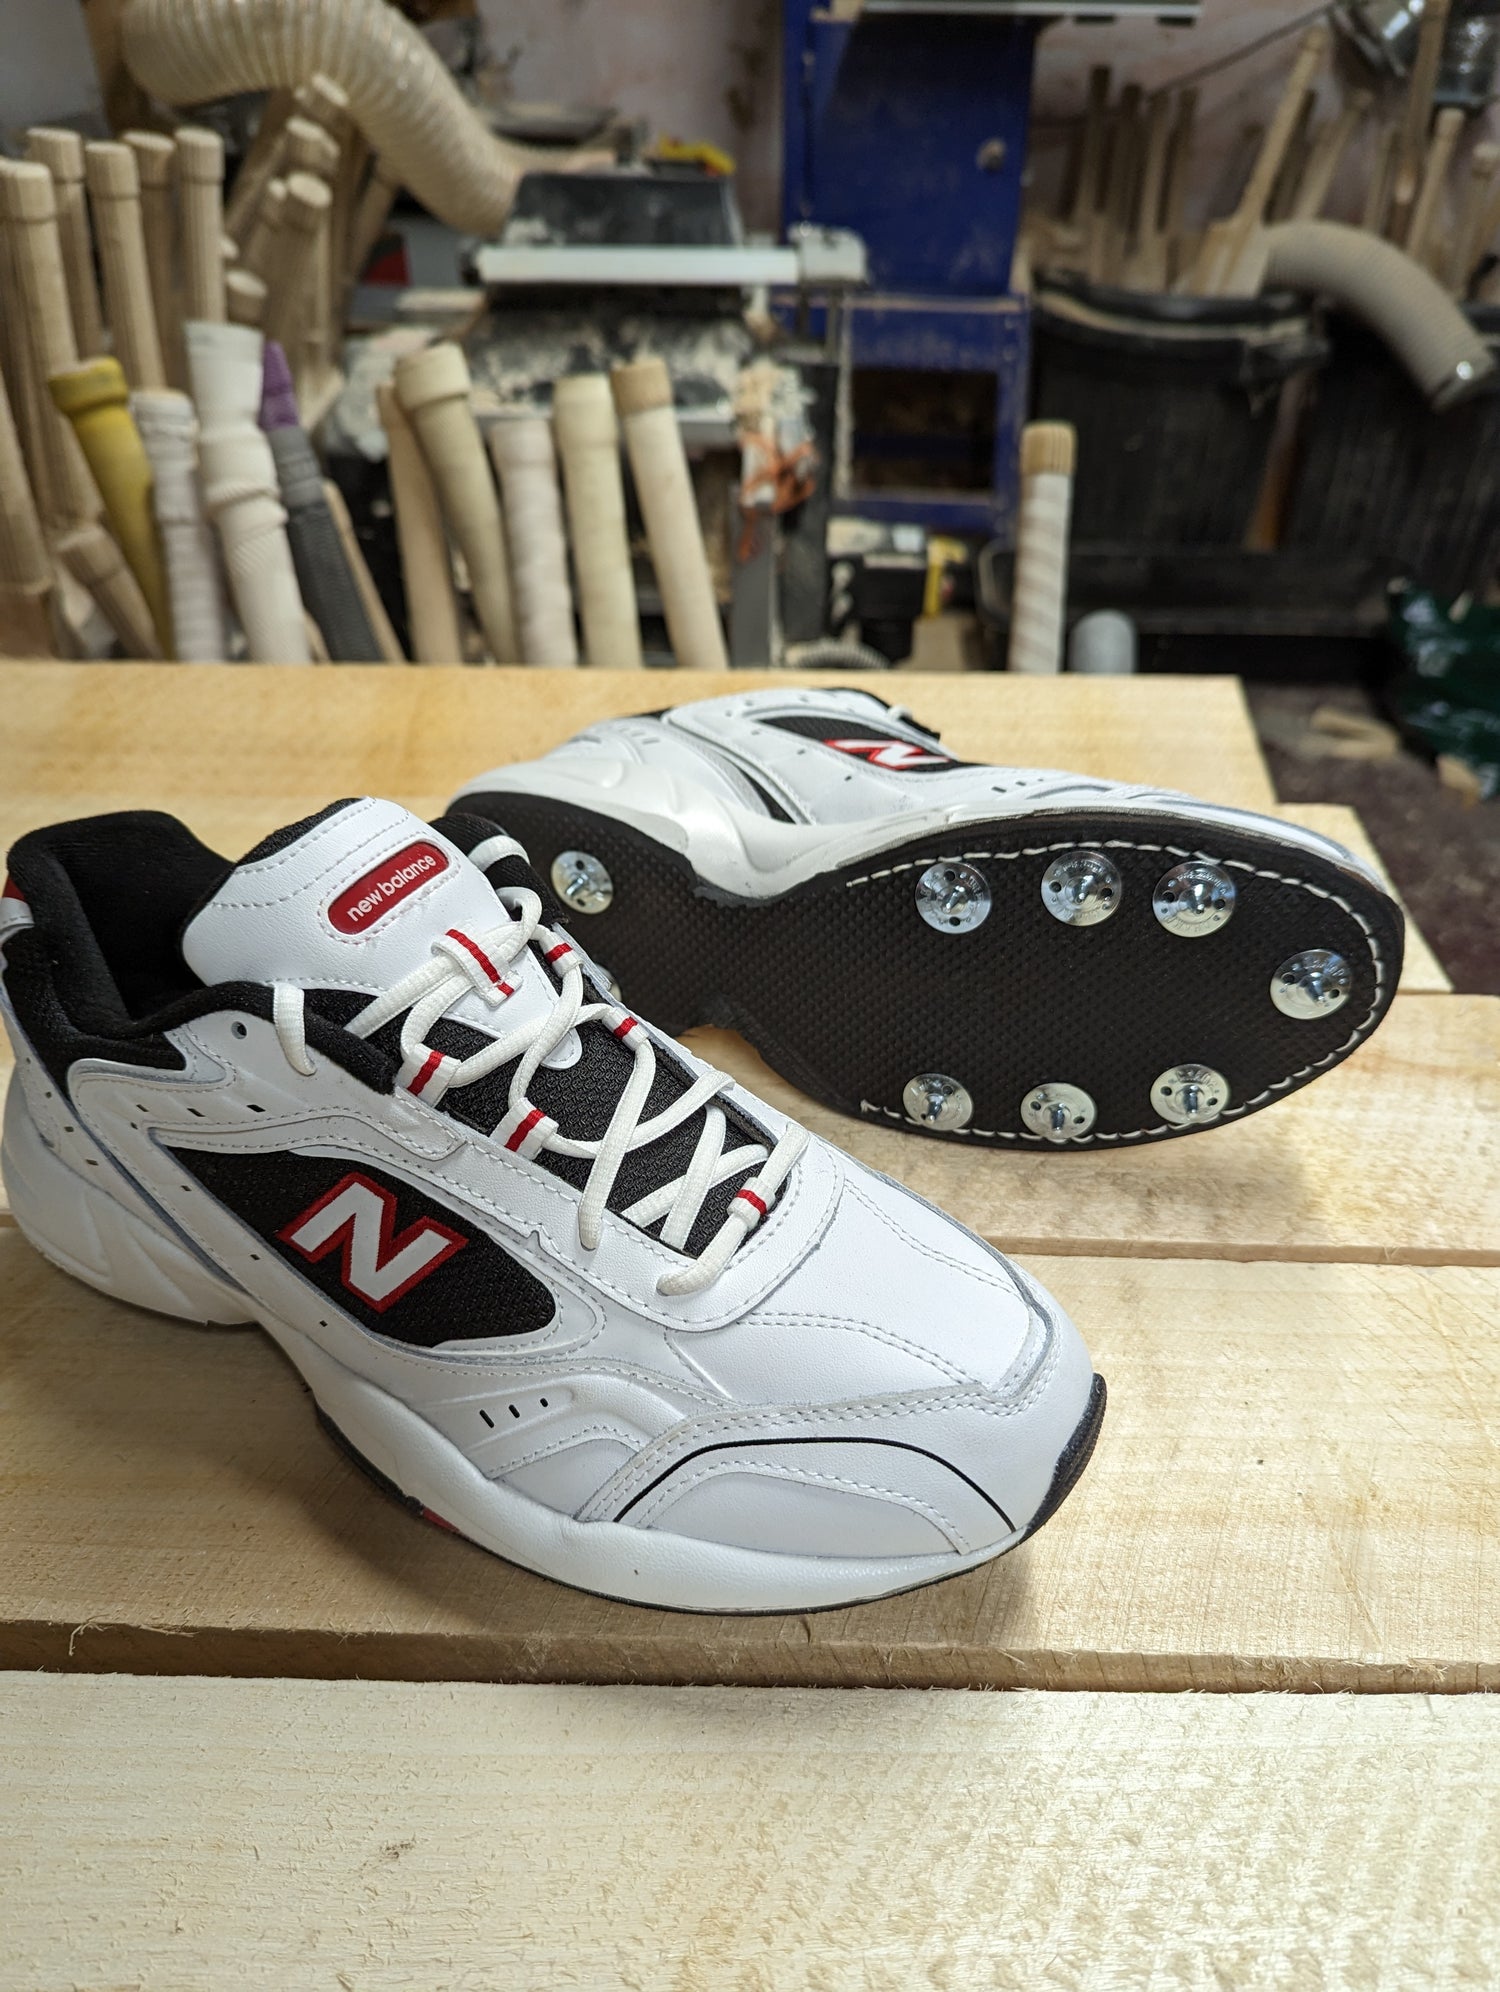 New balance spiked cross trainers